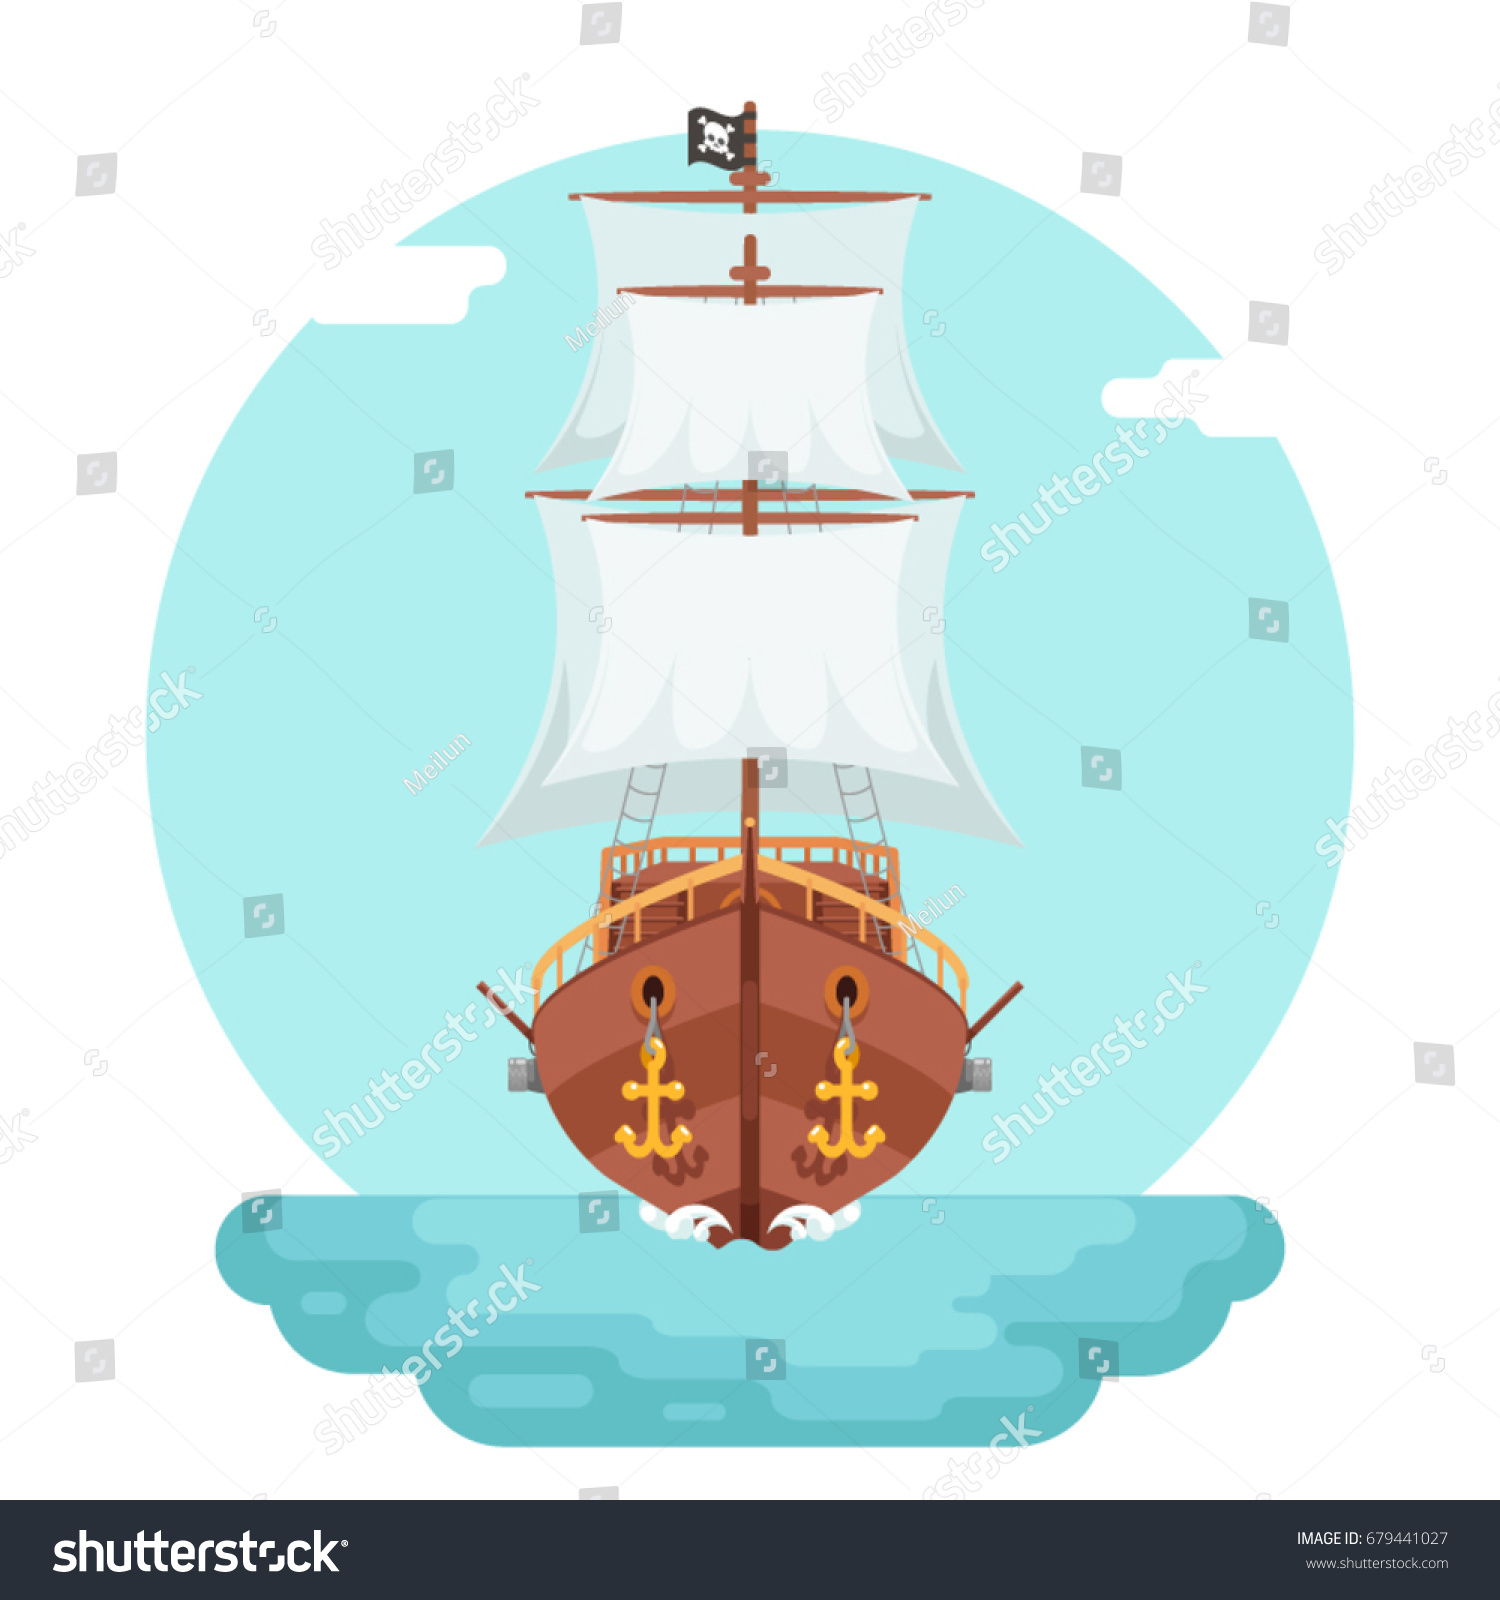 SVG of Front View Wooden pirate buccaneer filibuster corsair sea dog ship game icon isolated flat design vector illustration svg